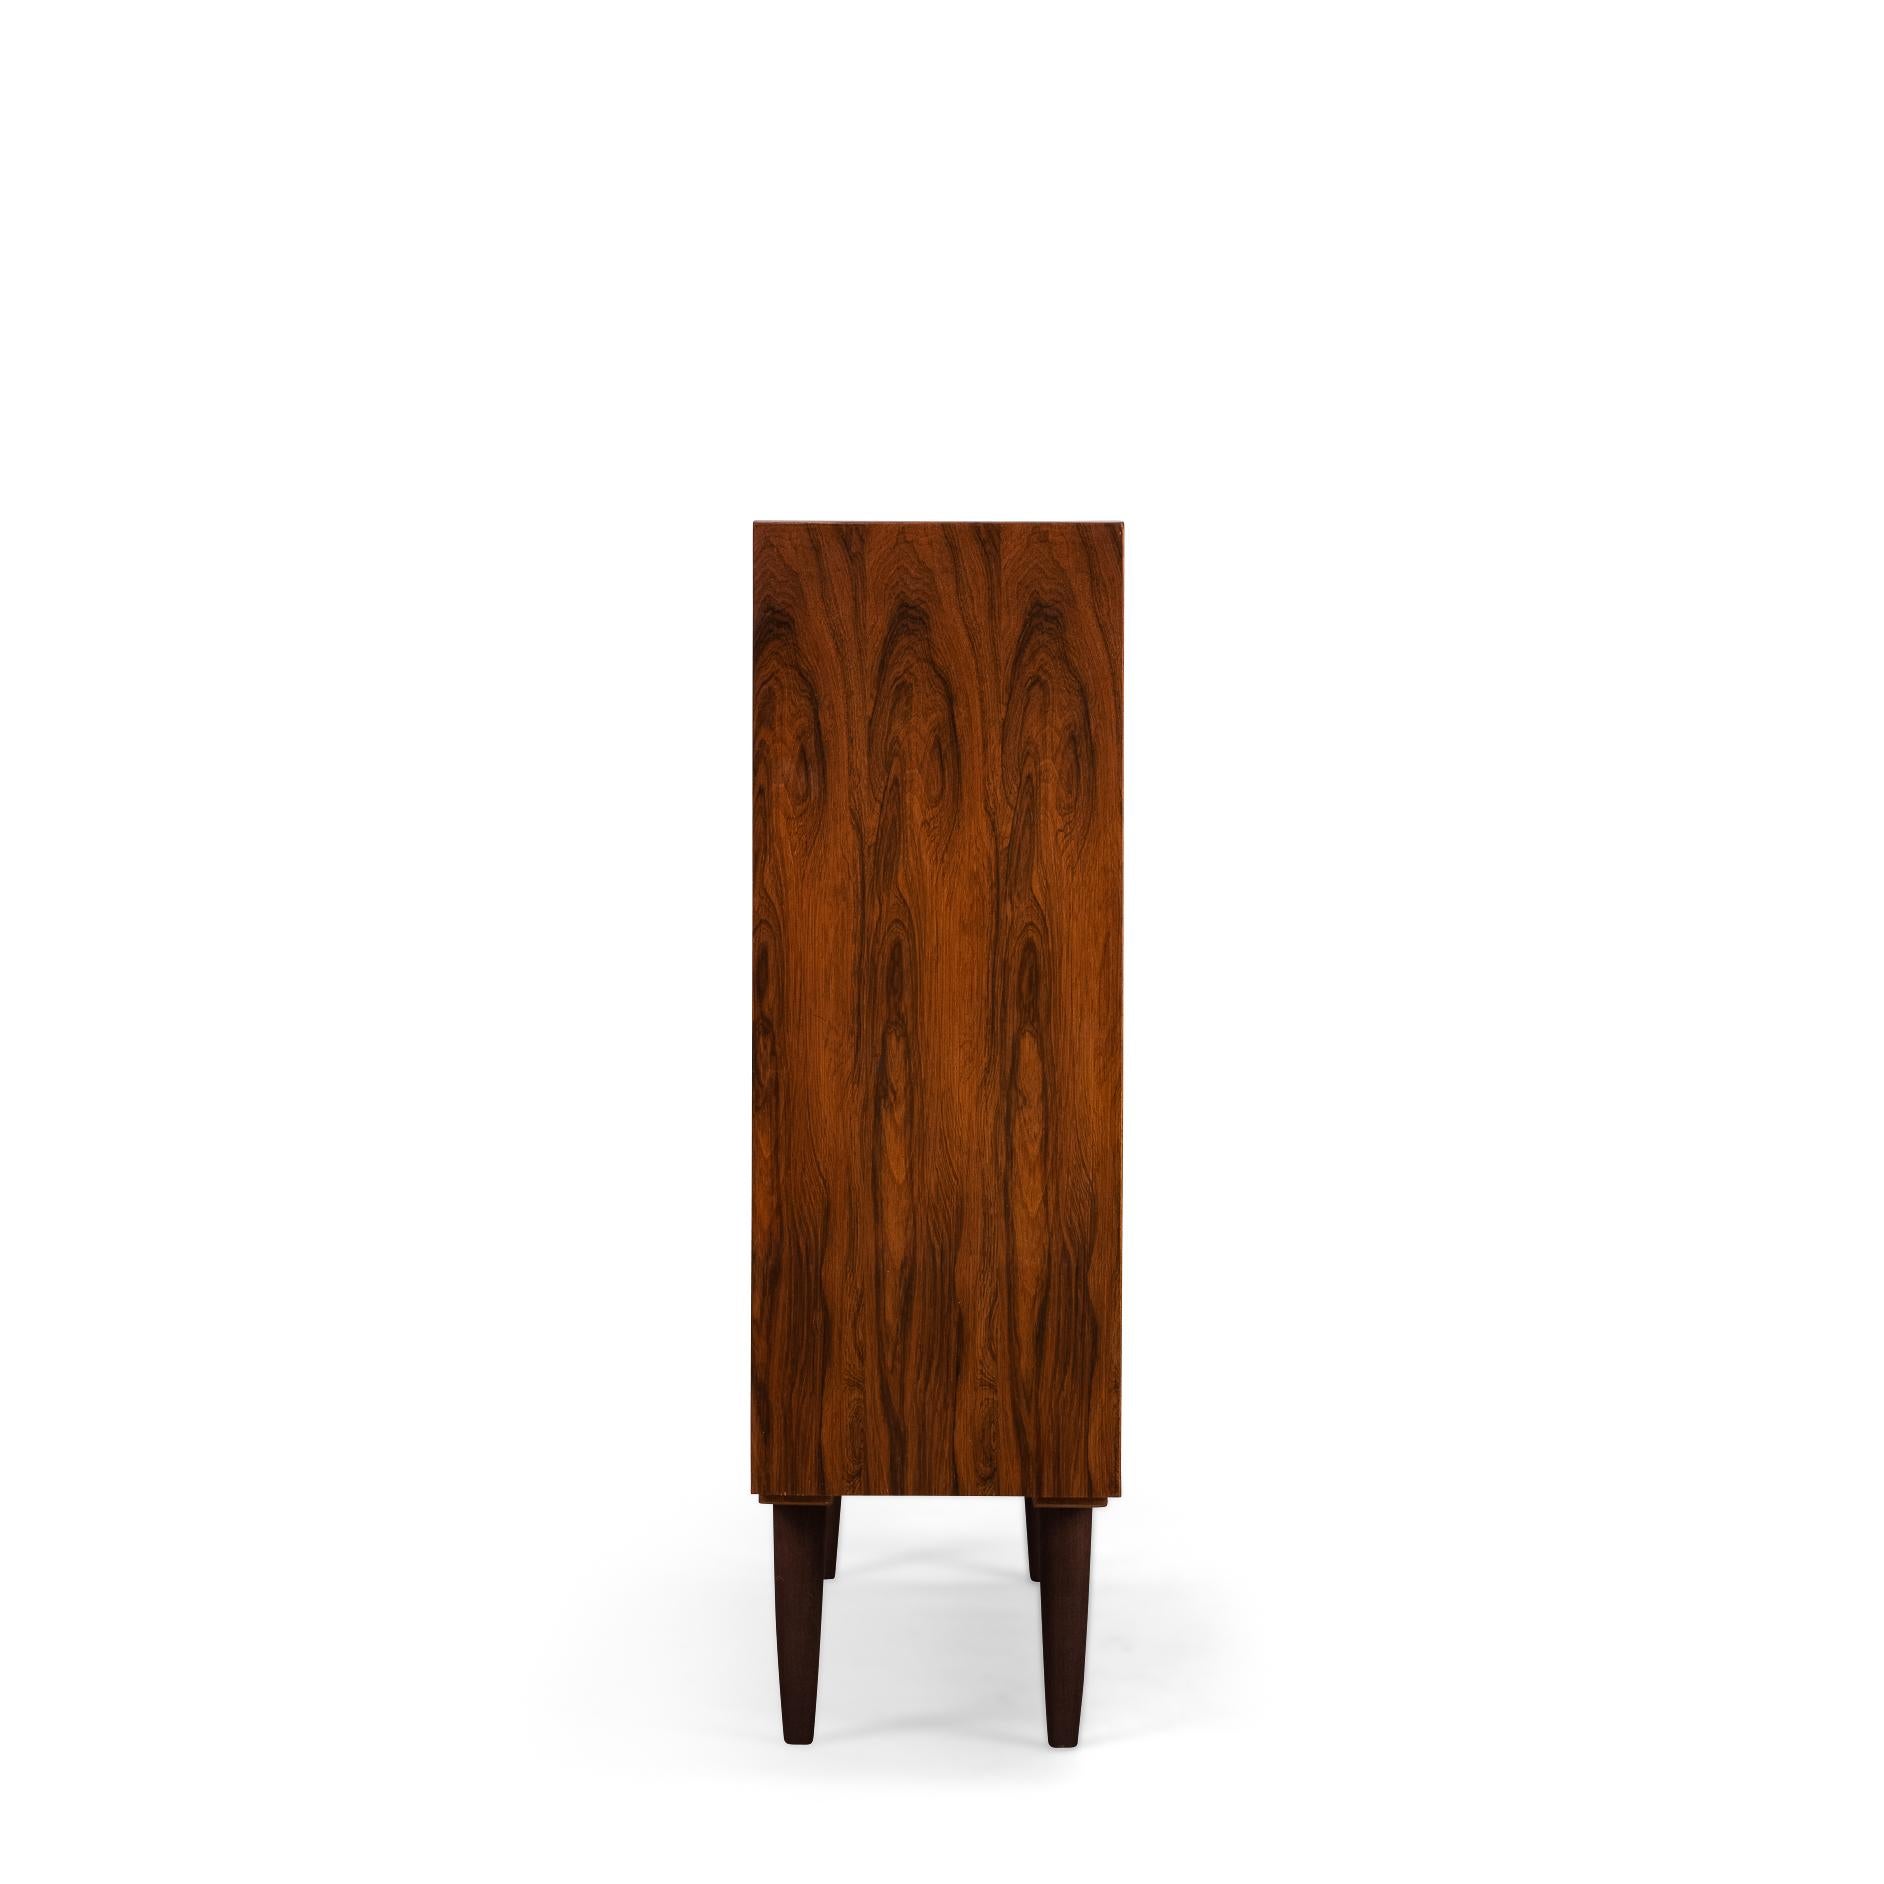 Danish low bookcase in beautiful rosewood veneer. Designed by Carlo Jensen and made by Hundevad & Co. Unfortunately, the sticker has been lost over the years. However, a Hundevad bookcase can always be recognized by the planks that are